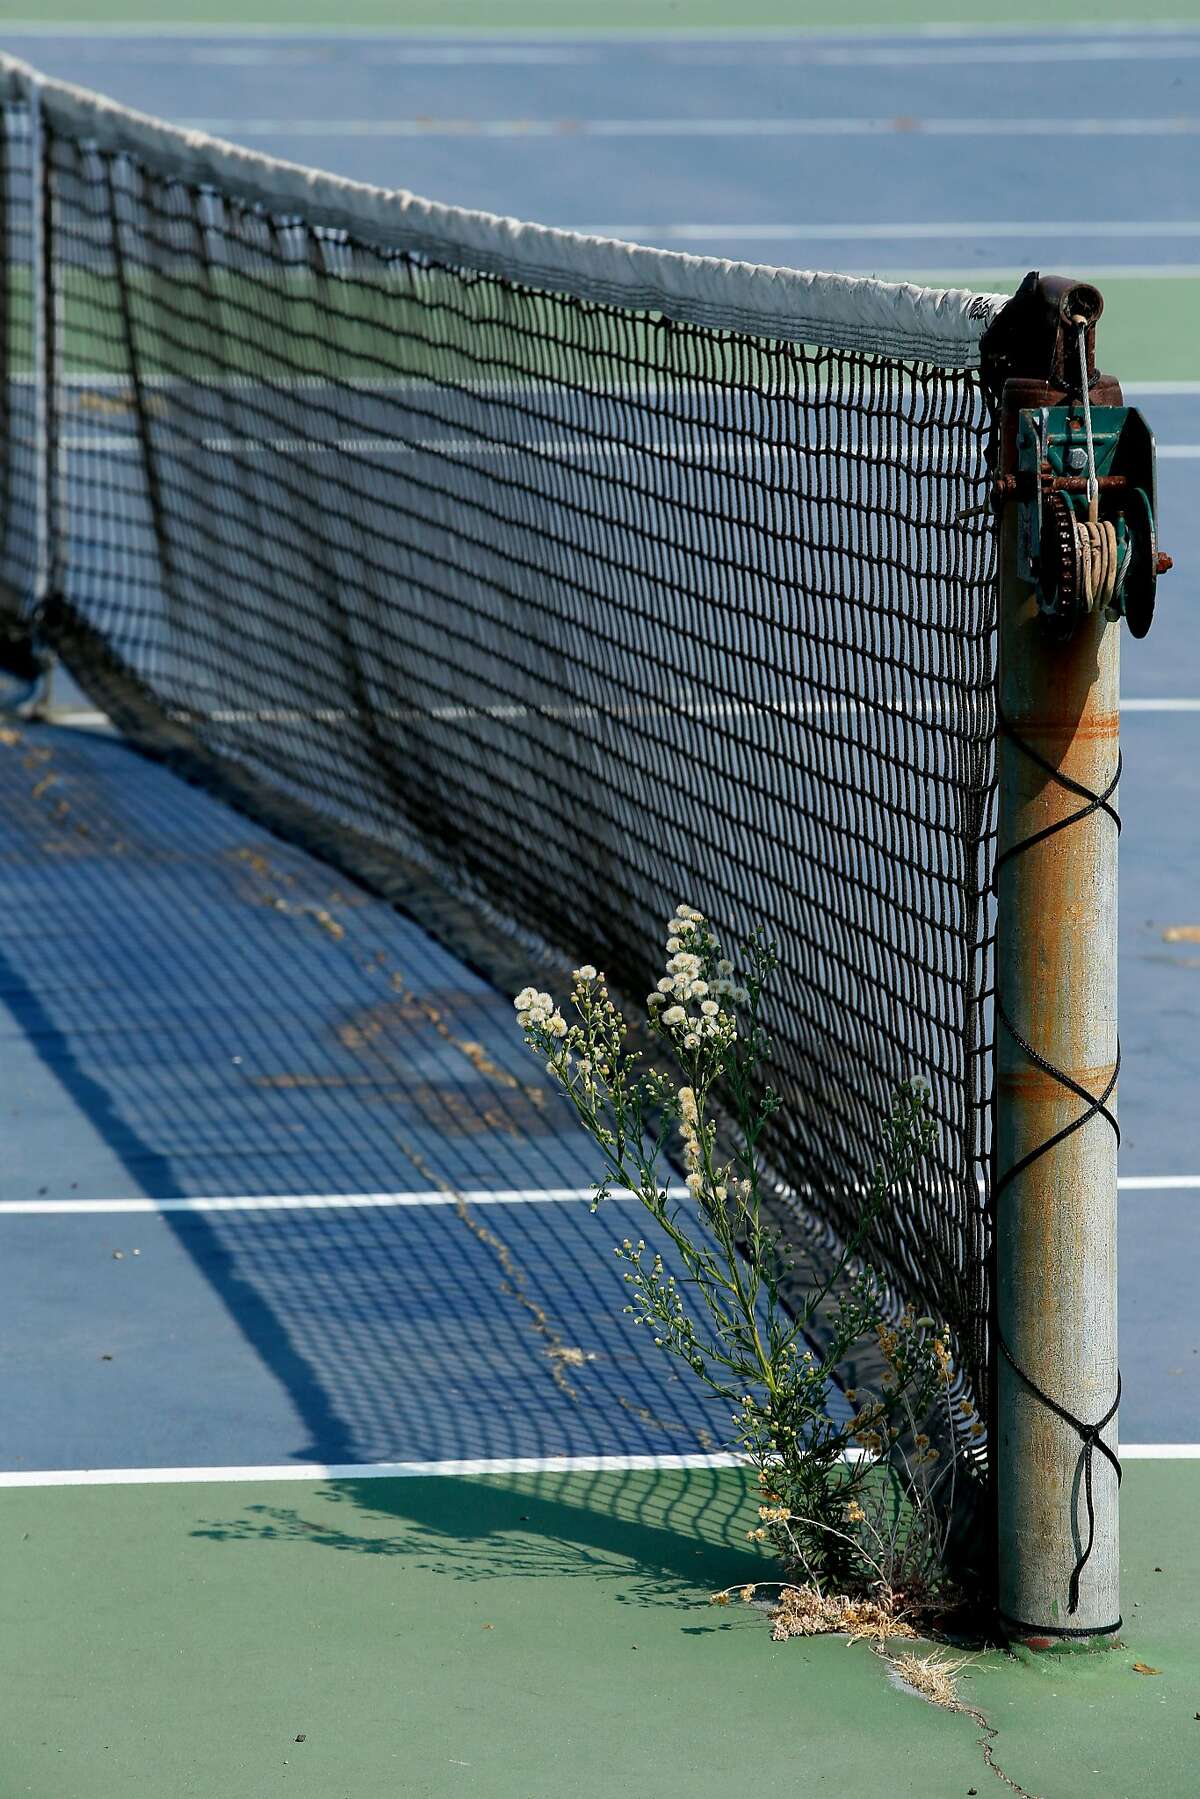 The tennis courts at Oakland Technical High School on Friday, Aug. 24, 2018, in Oakland, Calif.